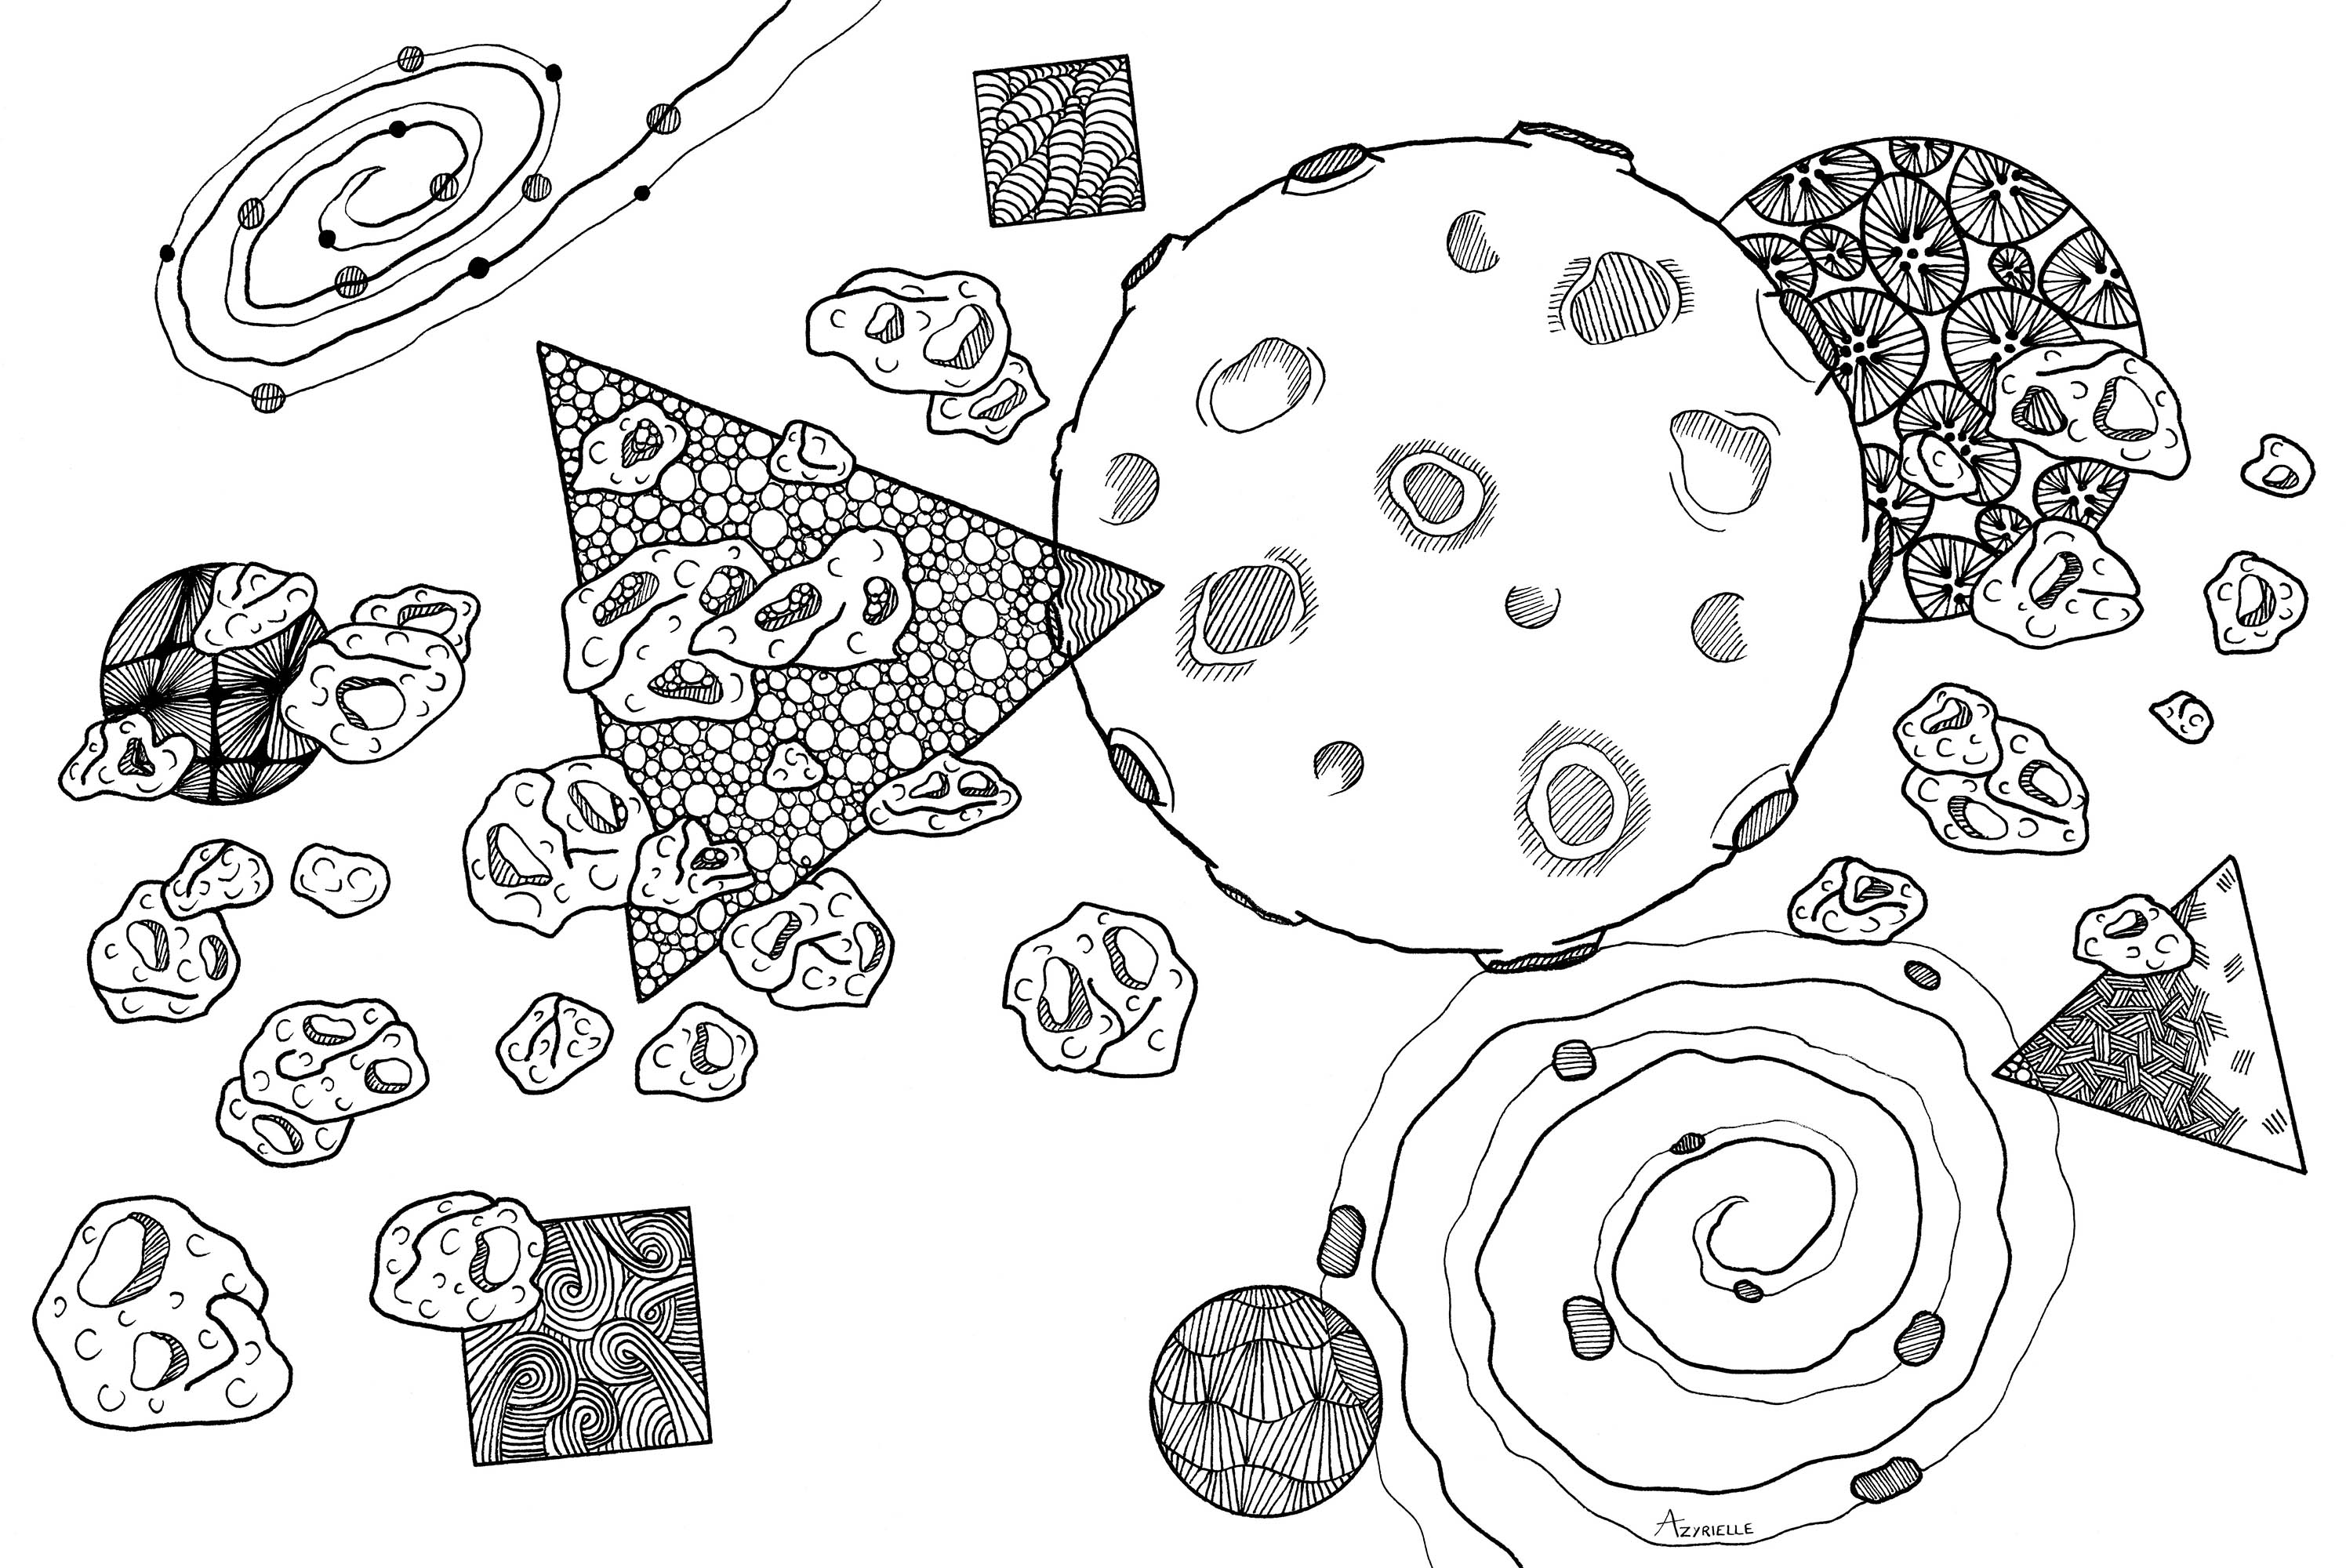 Discover this crazy galaxy in Zentangle style!